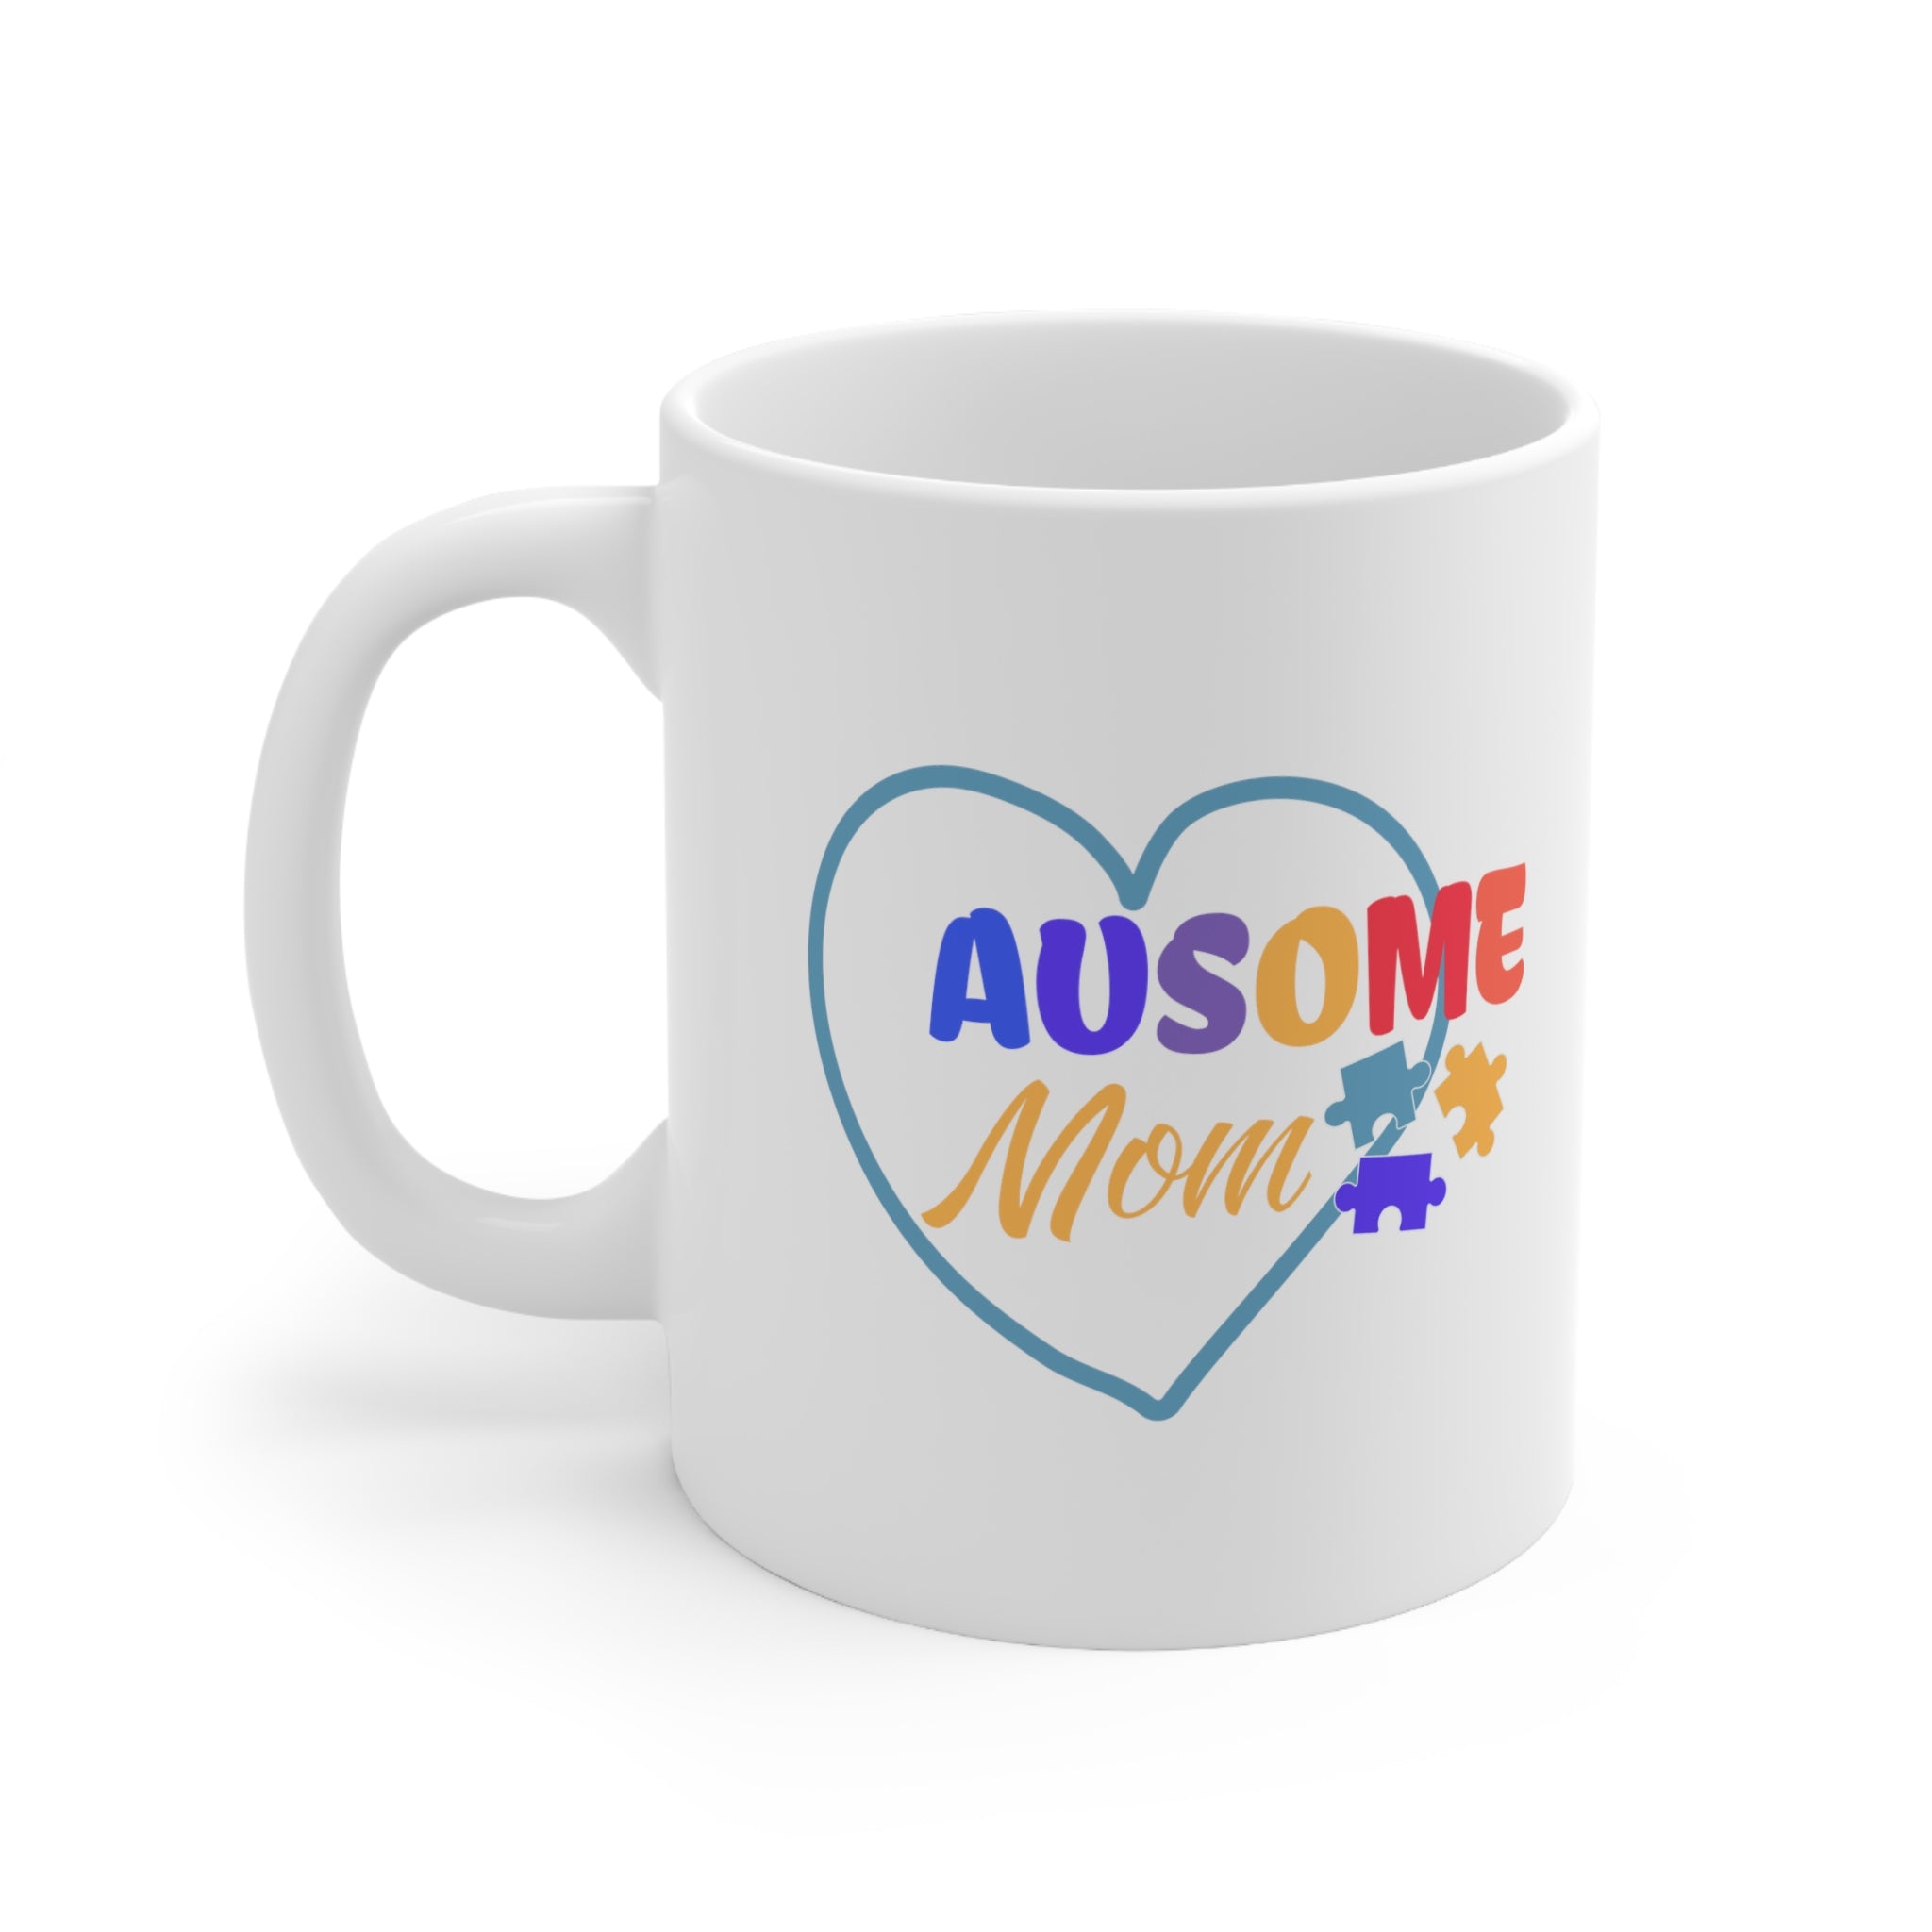 "Ausome Mom" Autism Awareness and Support Ceramic Mug 11oz - Celebrating the Strength and Love of Amazing Mothers: A Heartfelt Homage to Autism Advocacy